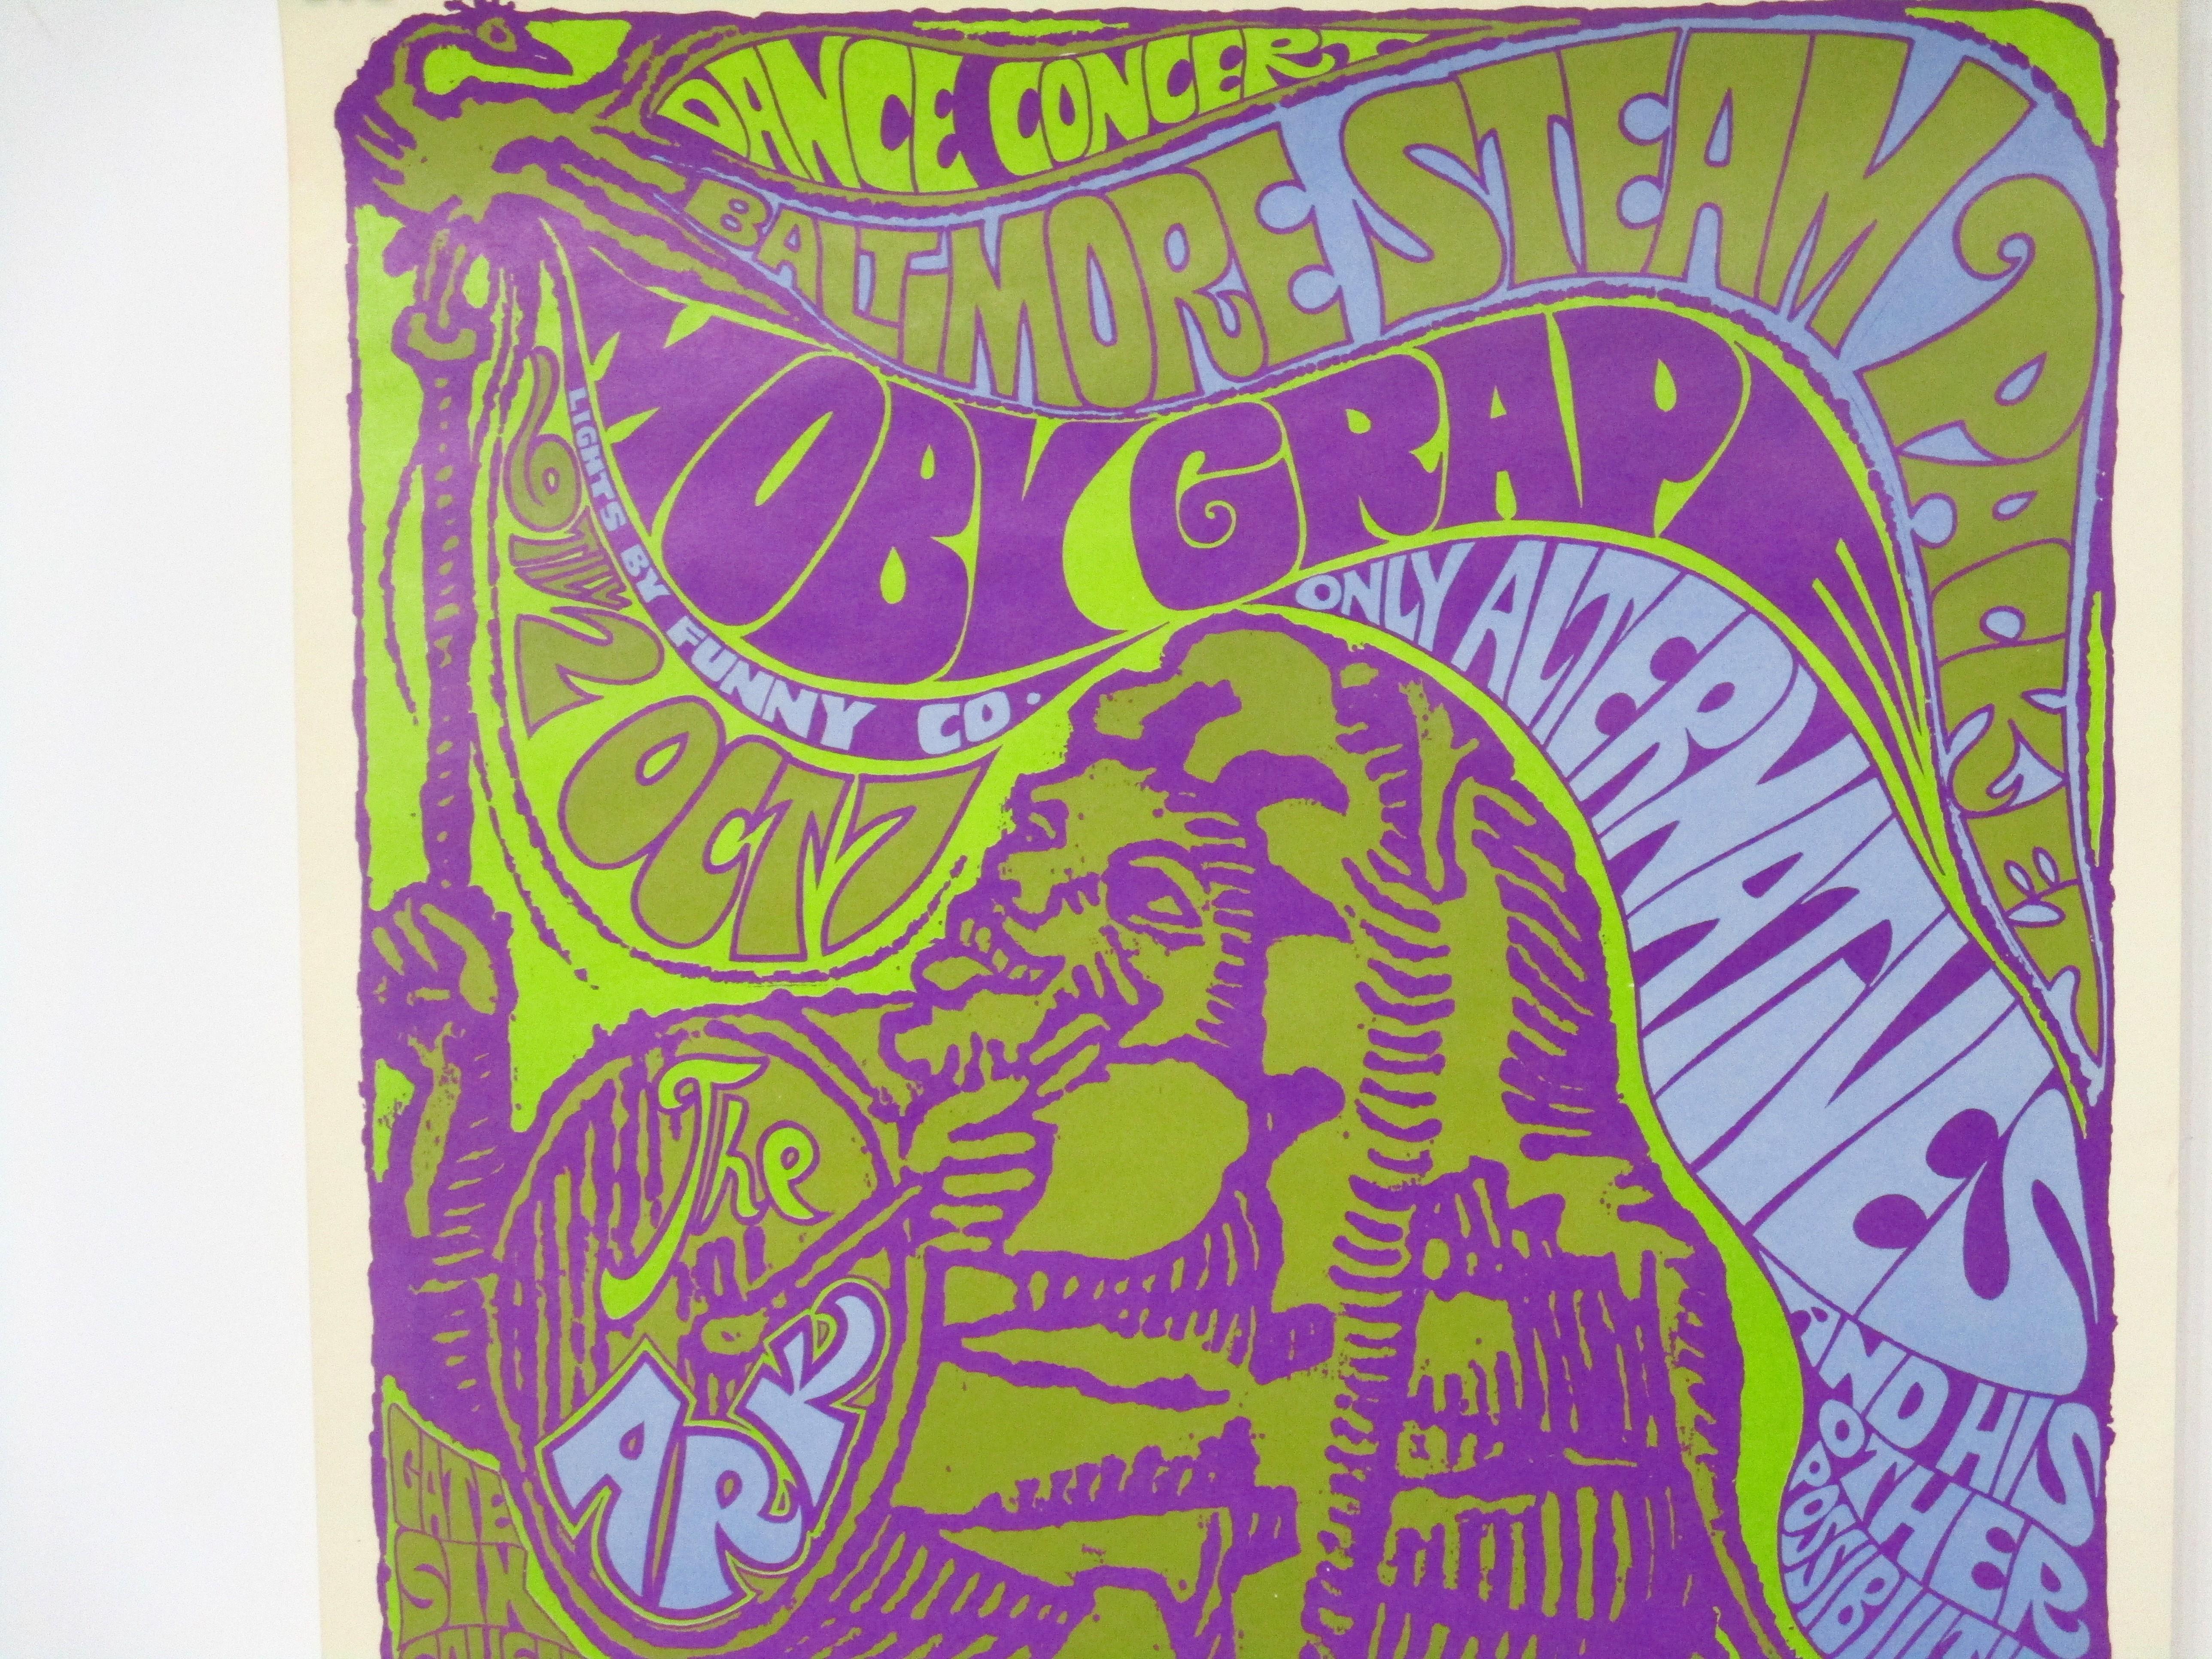 A wild vintage psychedelic rock show poster with a creature banging on a drum advertising a dance concert at the Ark . The bands playing at the event include Baltimore Steam Packet, Moby Grape and Only Alternaives with light show by Funny company .